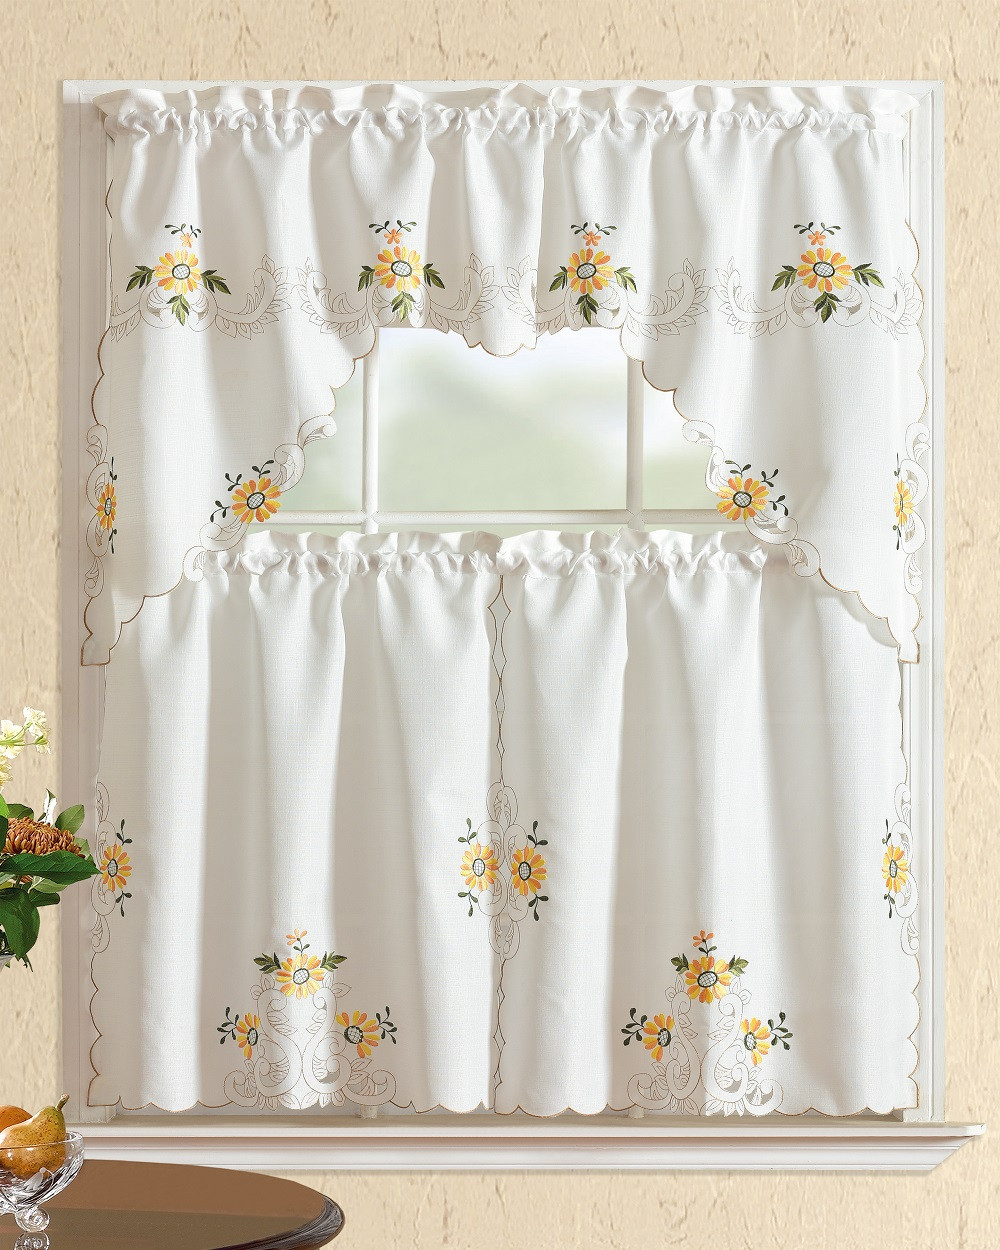 Walmart Com Kitchen Curtains
 All American Collection Modern Embroidered 3pc Kitchen